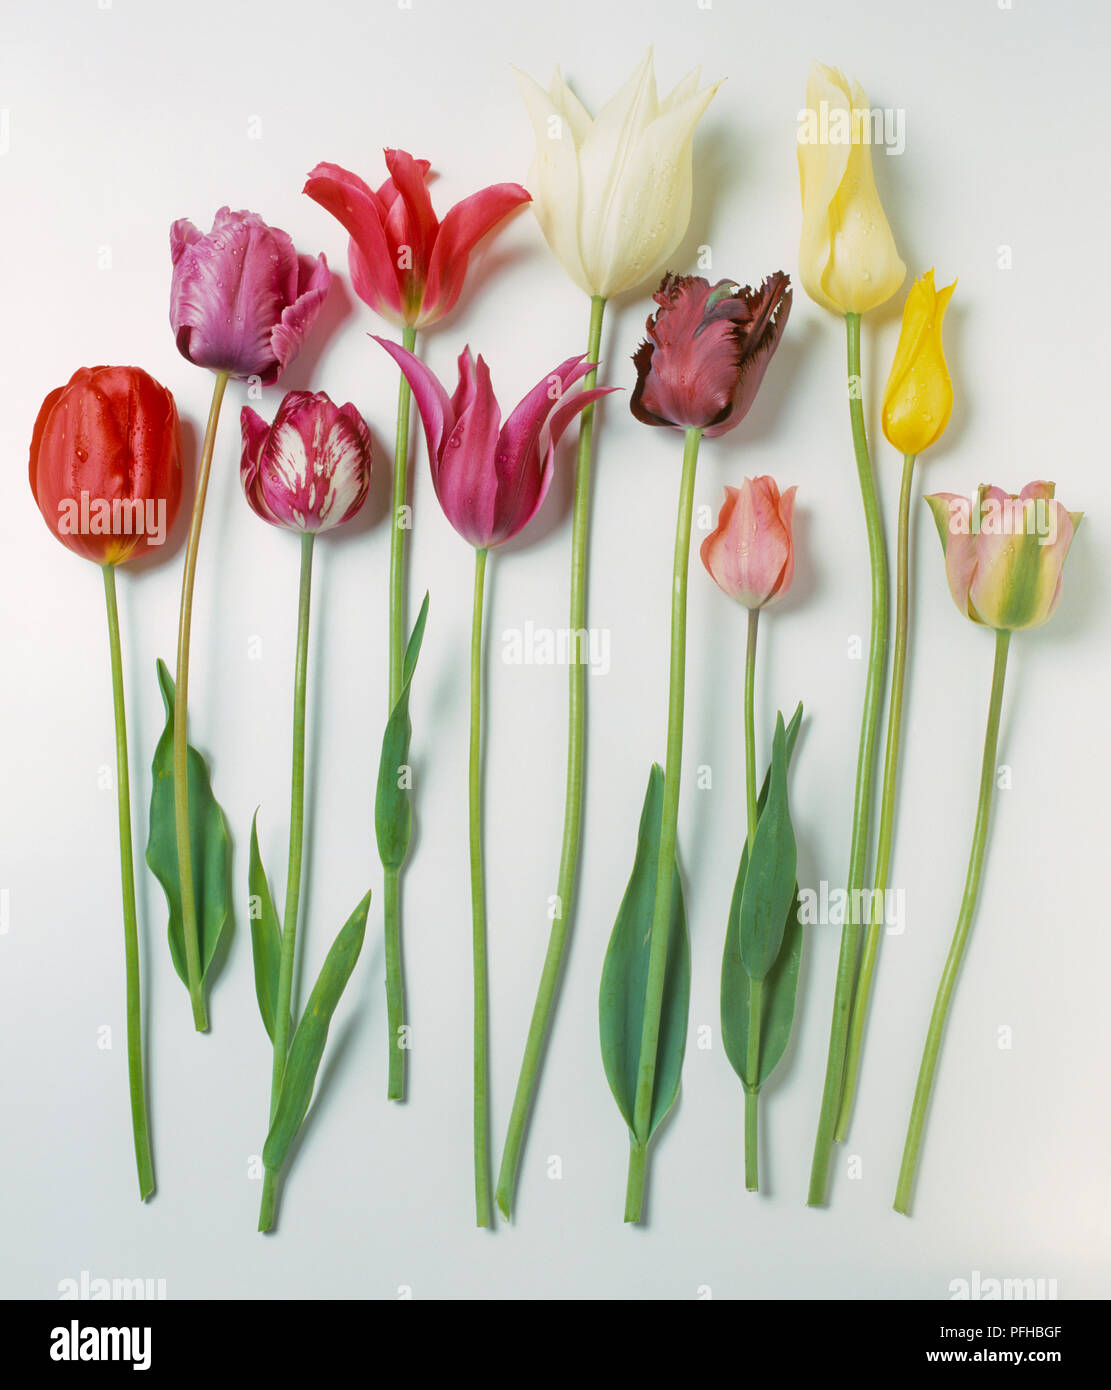 Selection of tulip cuttings, including Tulipa 'Flying Dutchman', 'Blue Parrot', 'May Blossom', 'Dyanito', 'Captain Fryatt', 'White Triumphator', 'Black Parrot', 'China Pink', 'Aster Nielsen', 'West Point', 'Greenland' Stock Photo